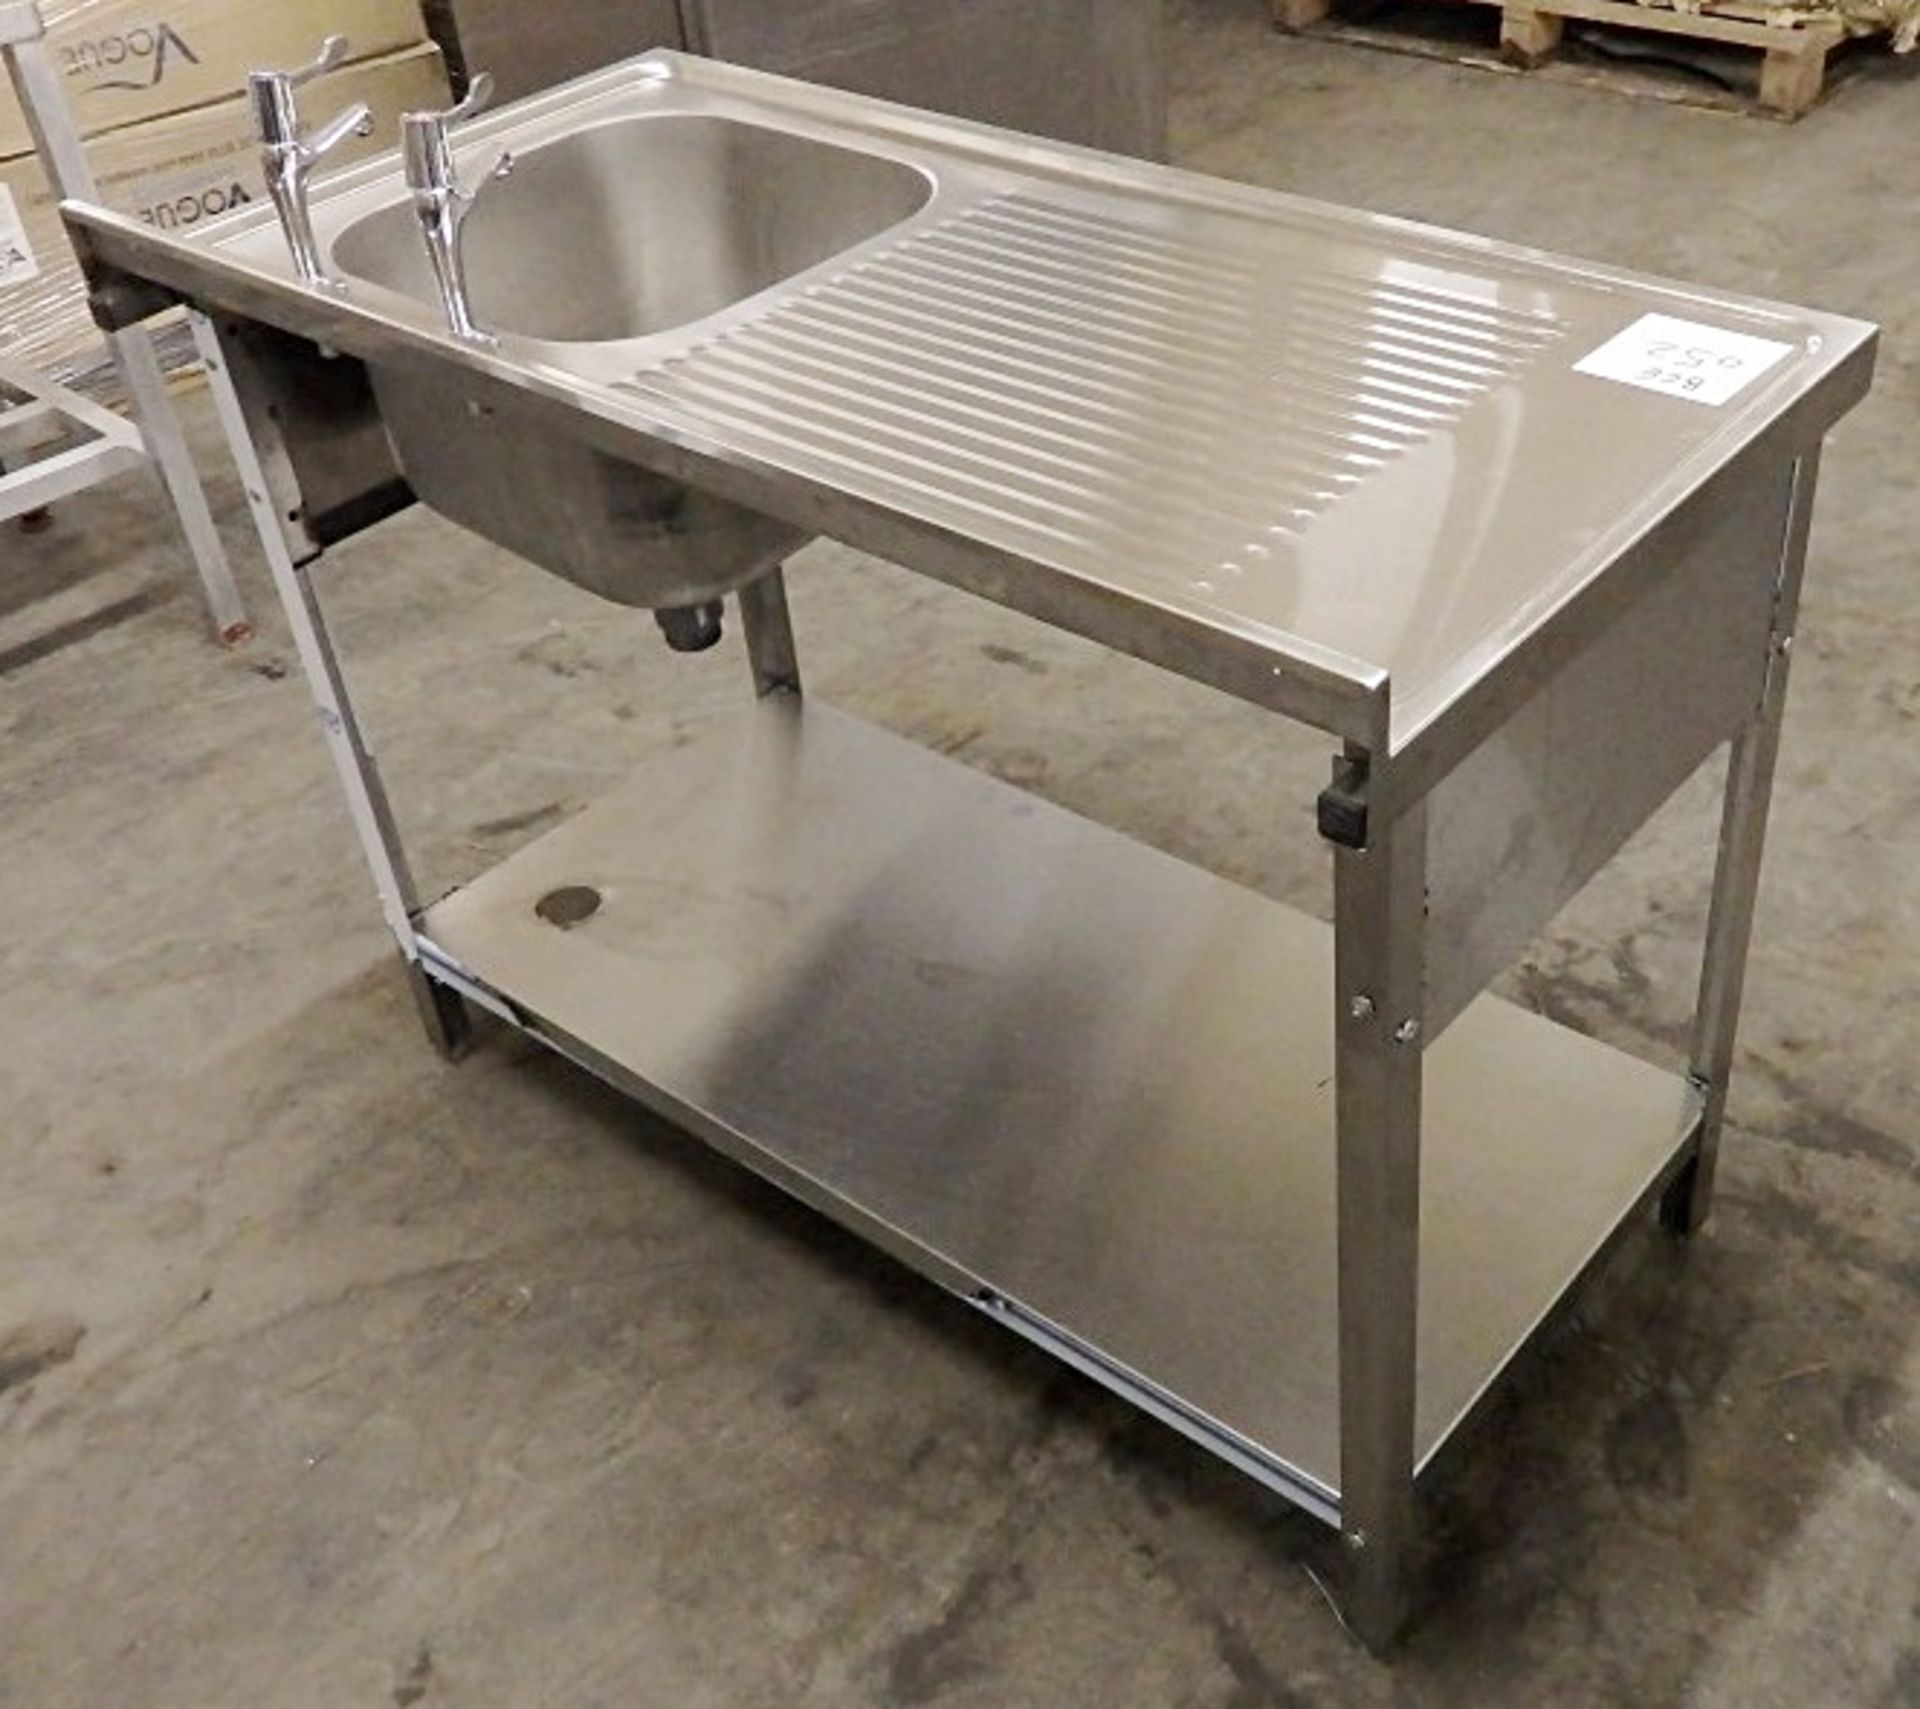 1 x Freestanding Commercial Stainless Steel Sink Unit - Dimensions: W120 x D60 x H92cm - Ref: BCE052 - Image 5 of 8